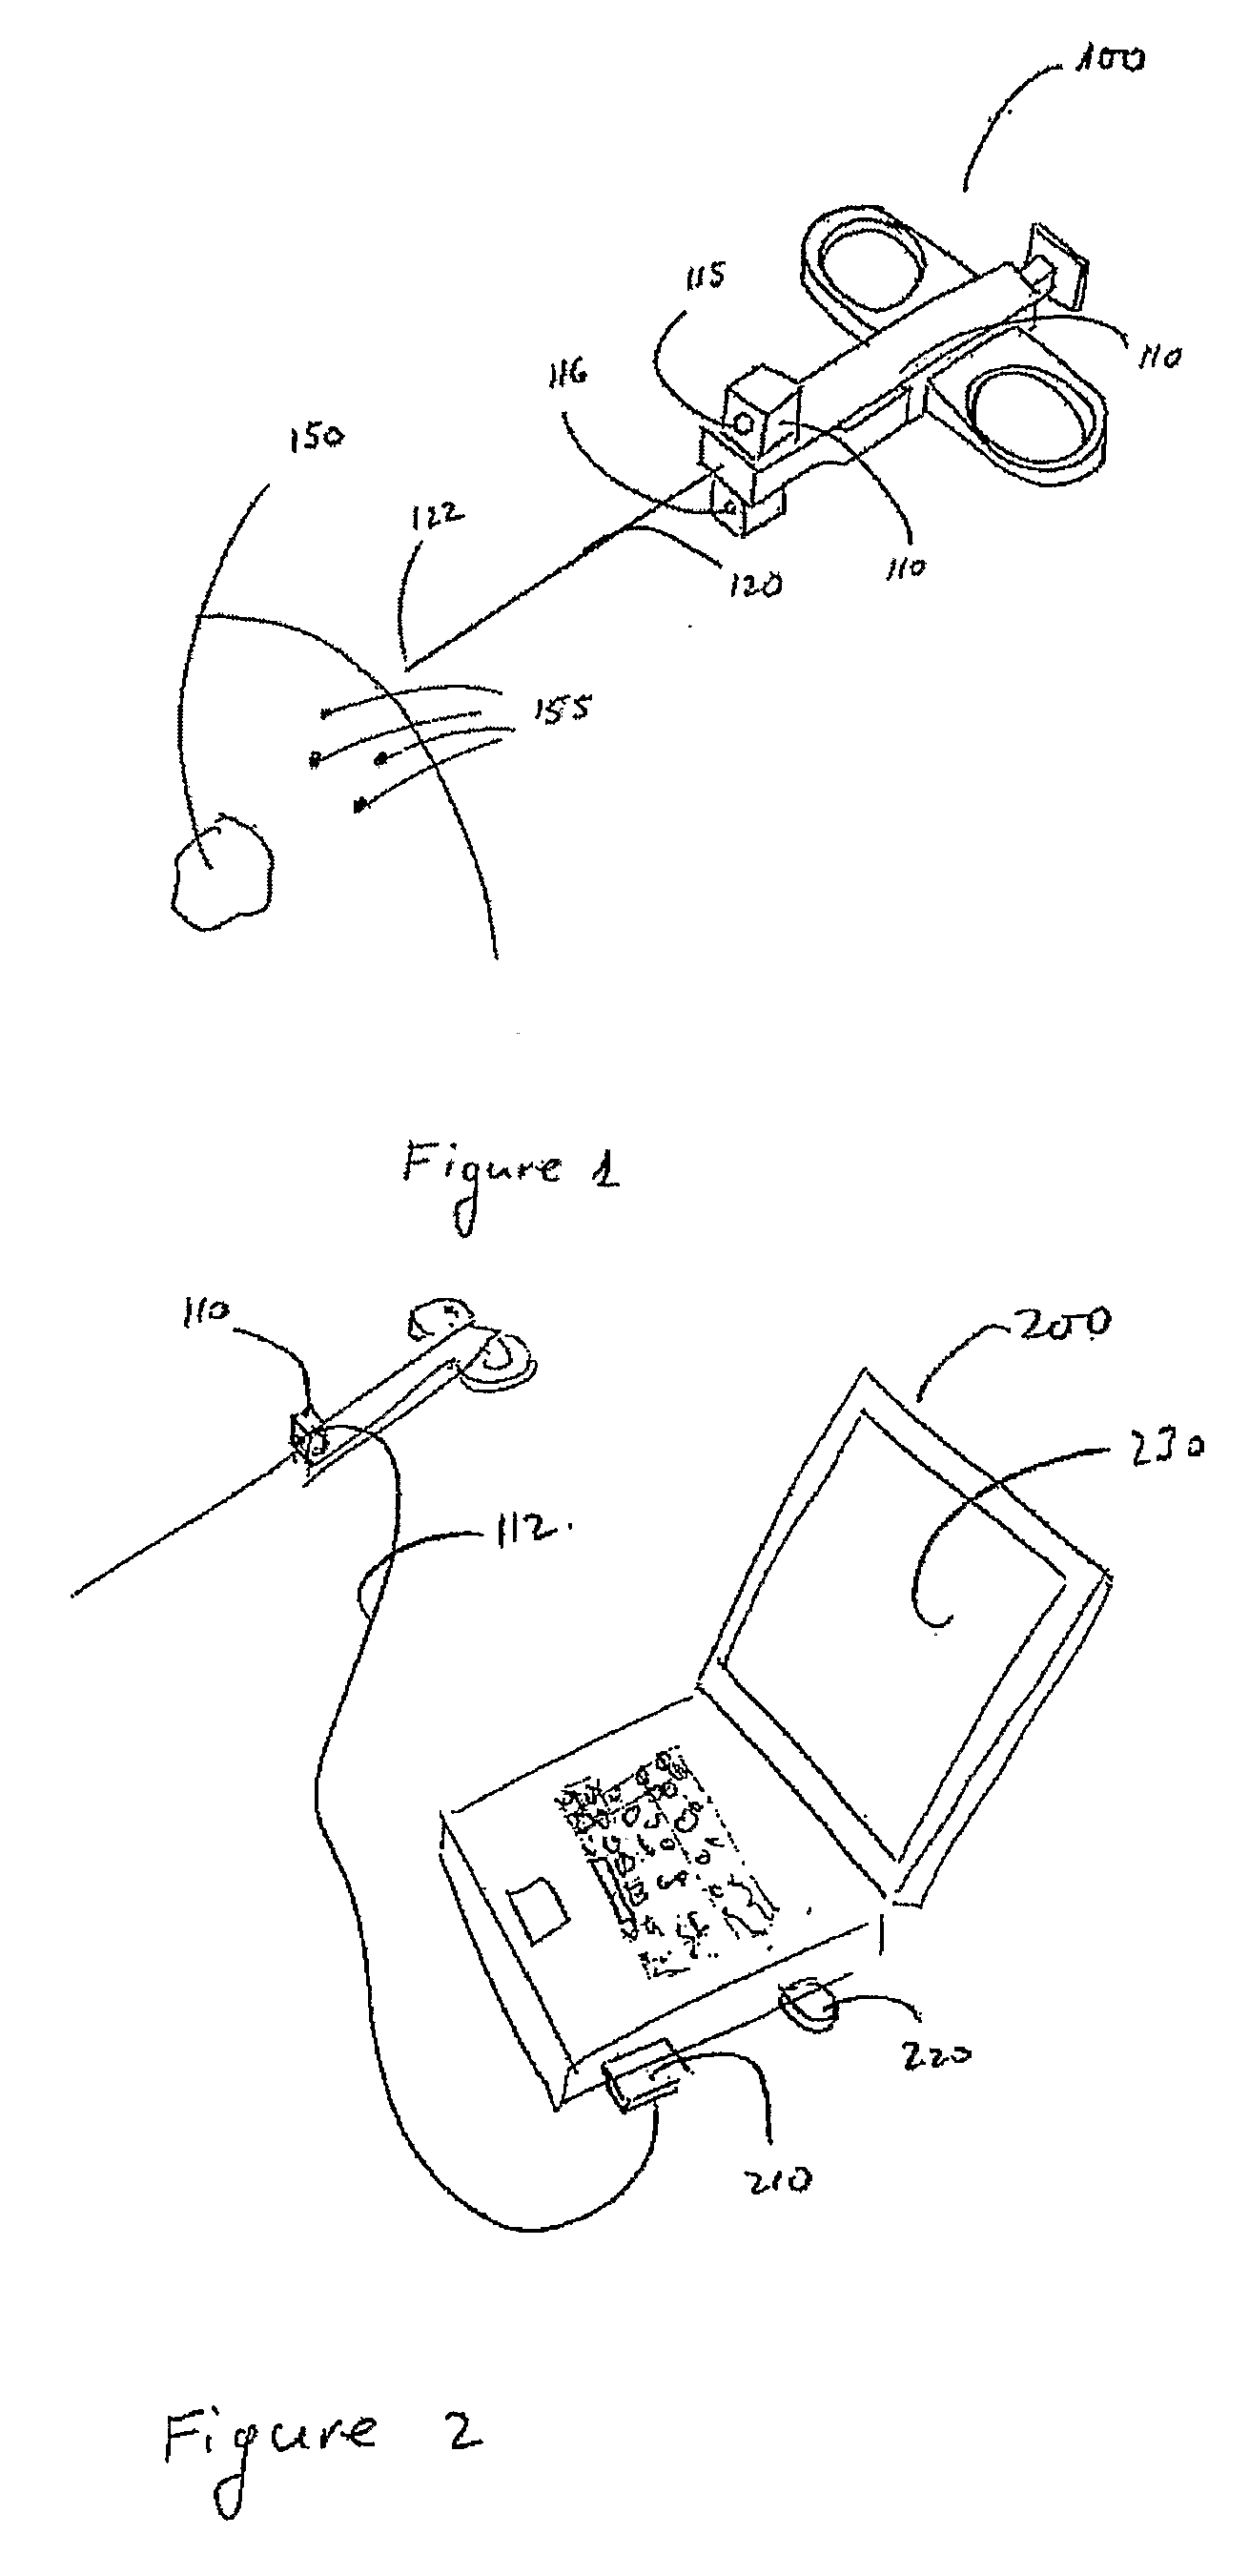 System and Method For Optical Position Measurement And Guidance Of A Rigid Or Semi-Flexible Tool To A Target